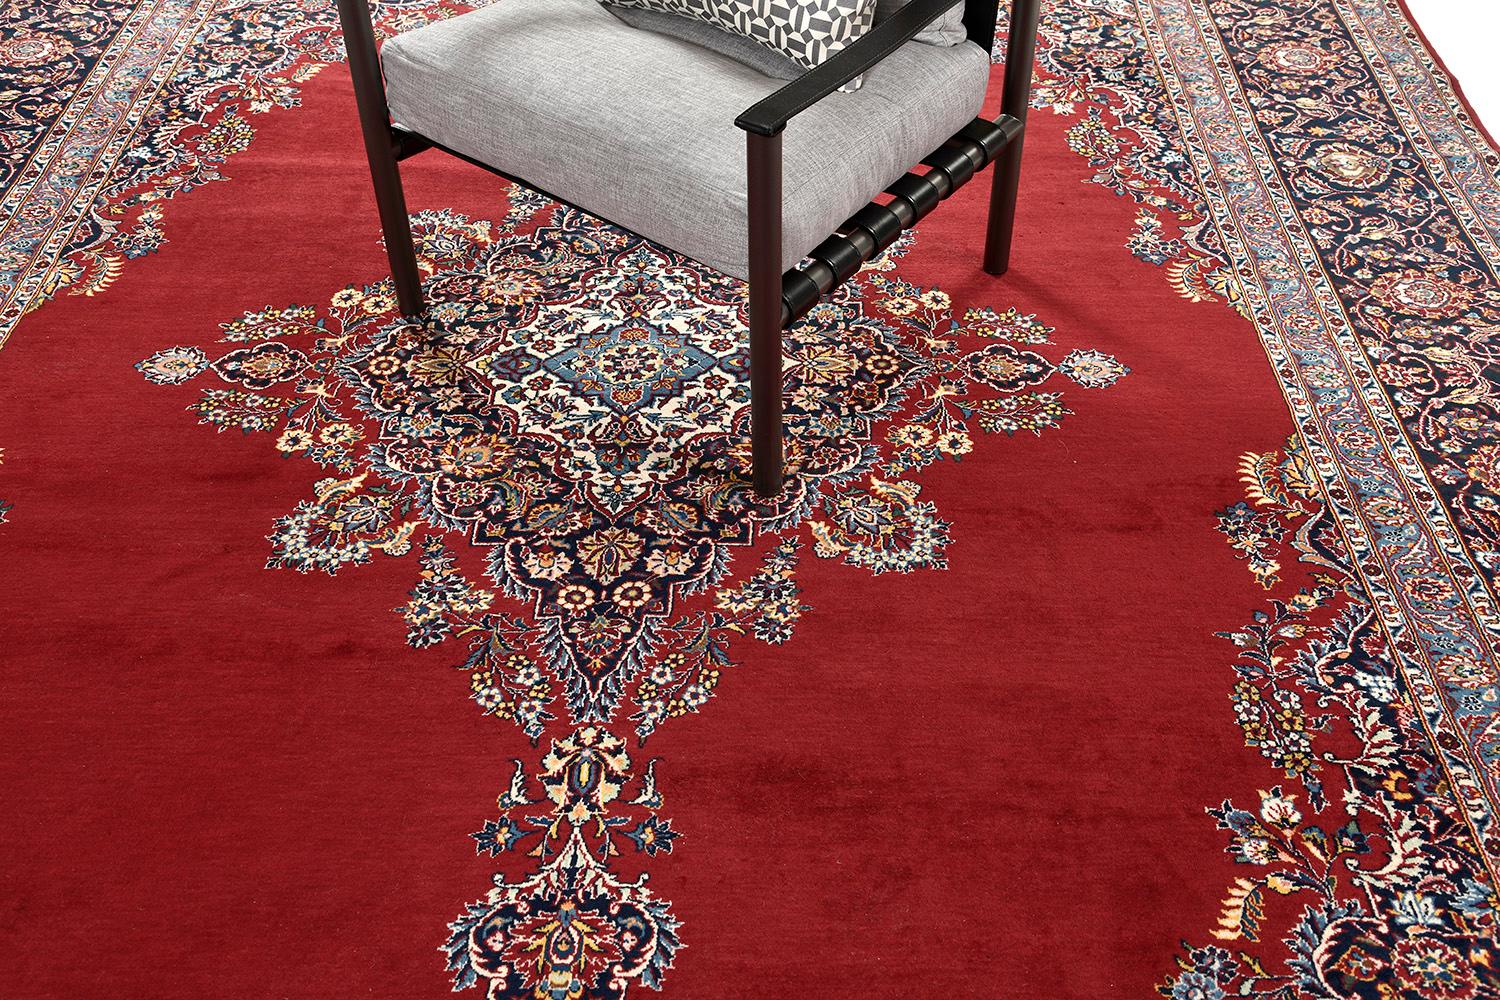 An impressive creation of Kashan rug that features a penny-worth impact from its every design. At its core, majestically presents a detailed diamond-shaped floral theme, motifs, and leafy scrolls. An effortless combination of various symmetrical